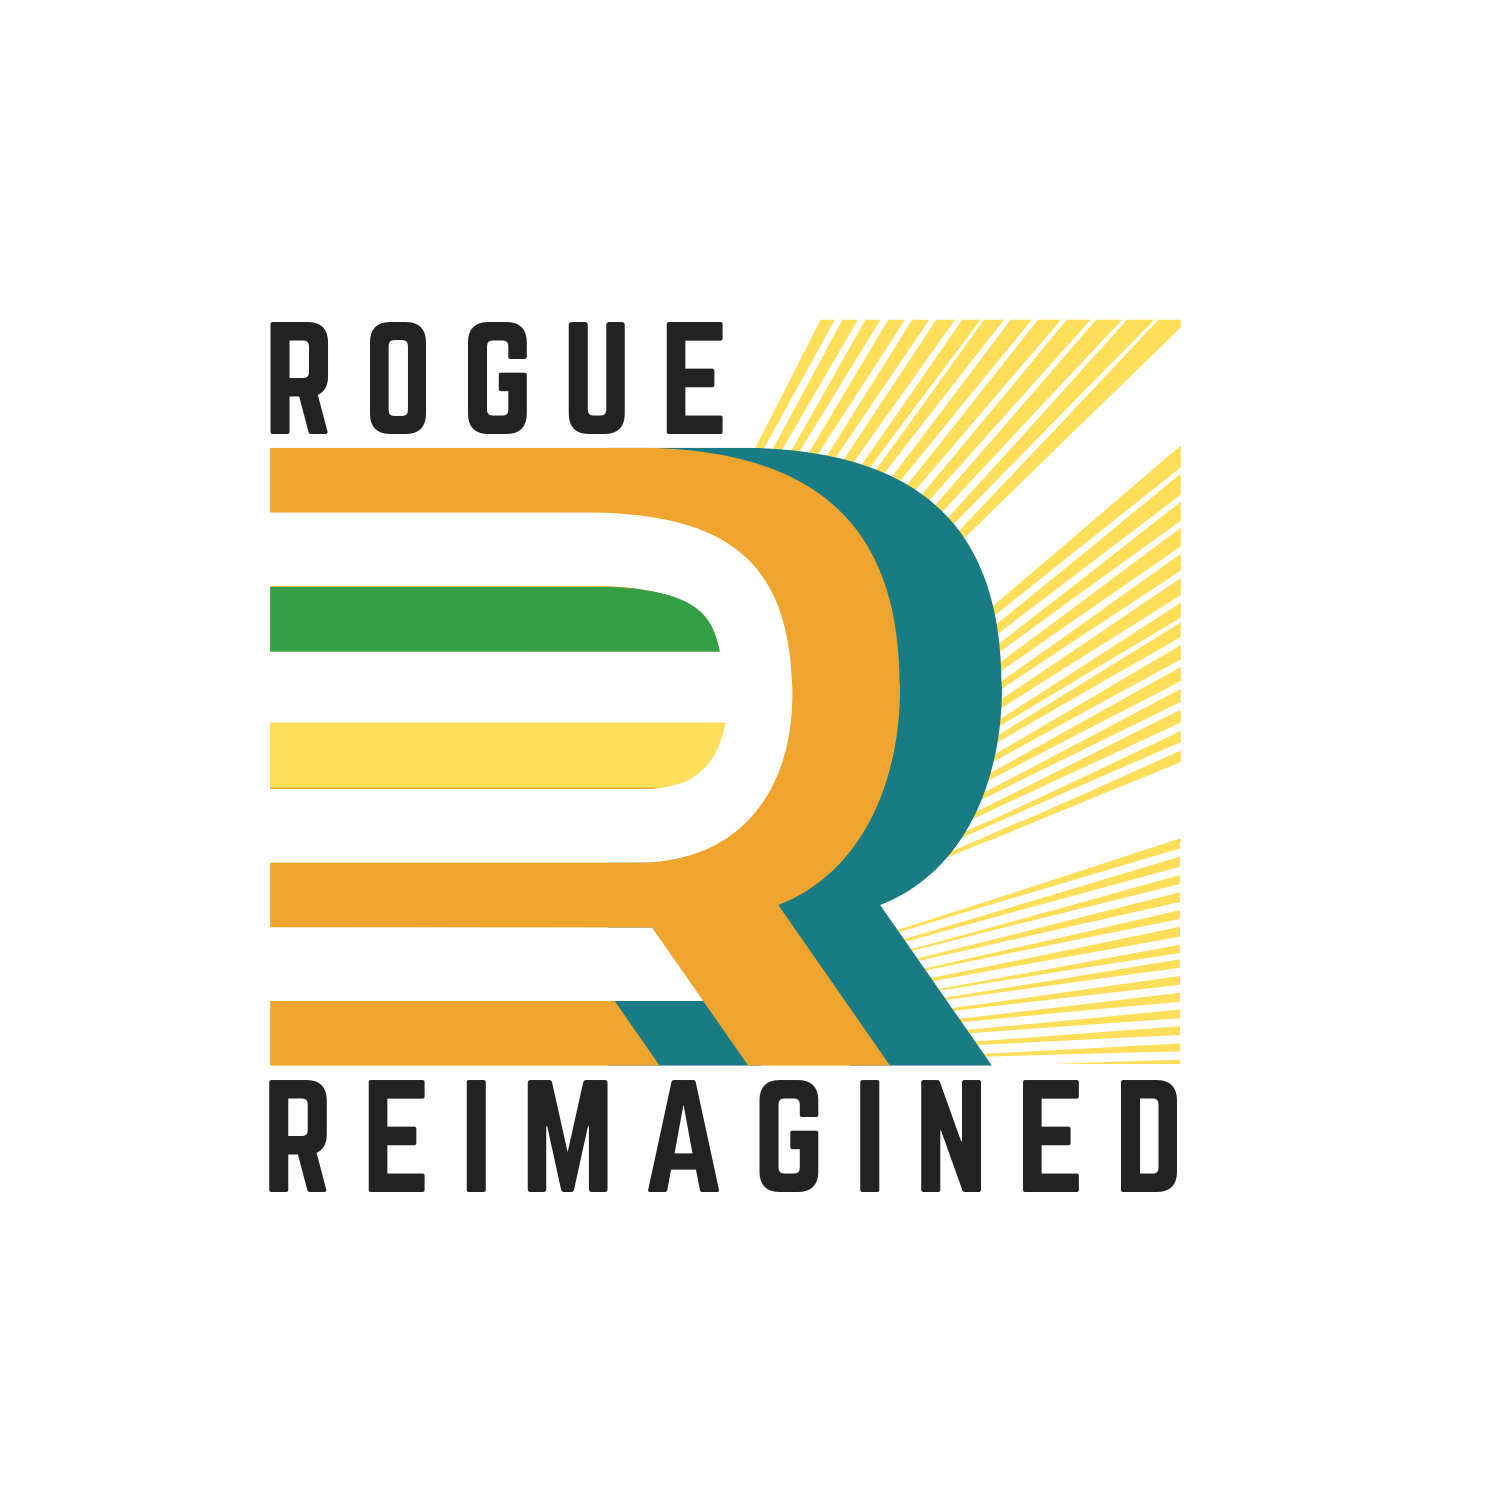 020923 Rogue Reimagined Community Listening Session